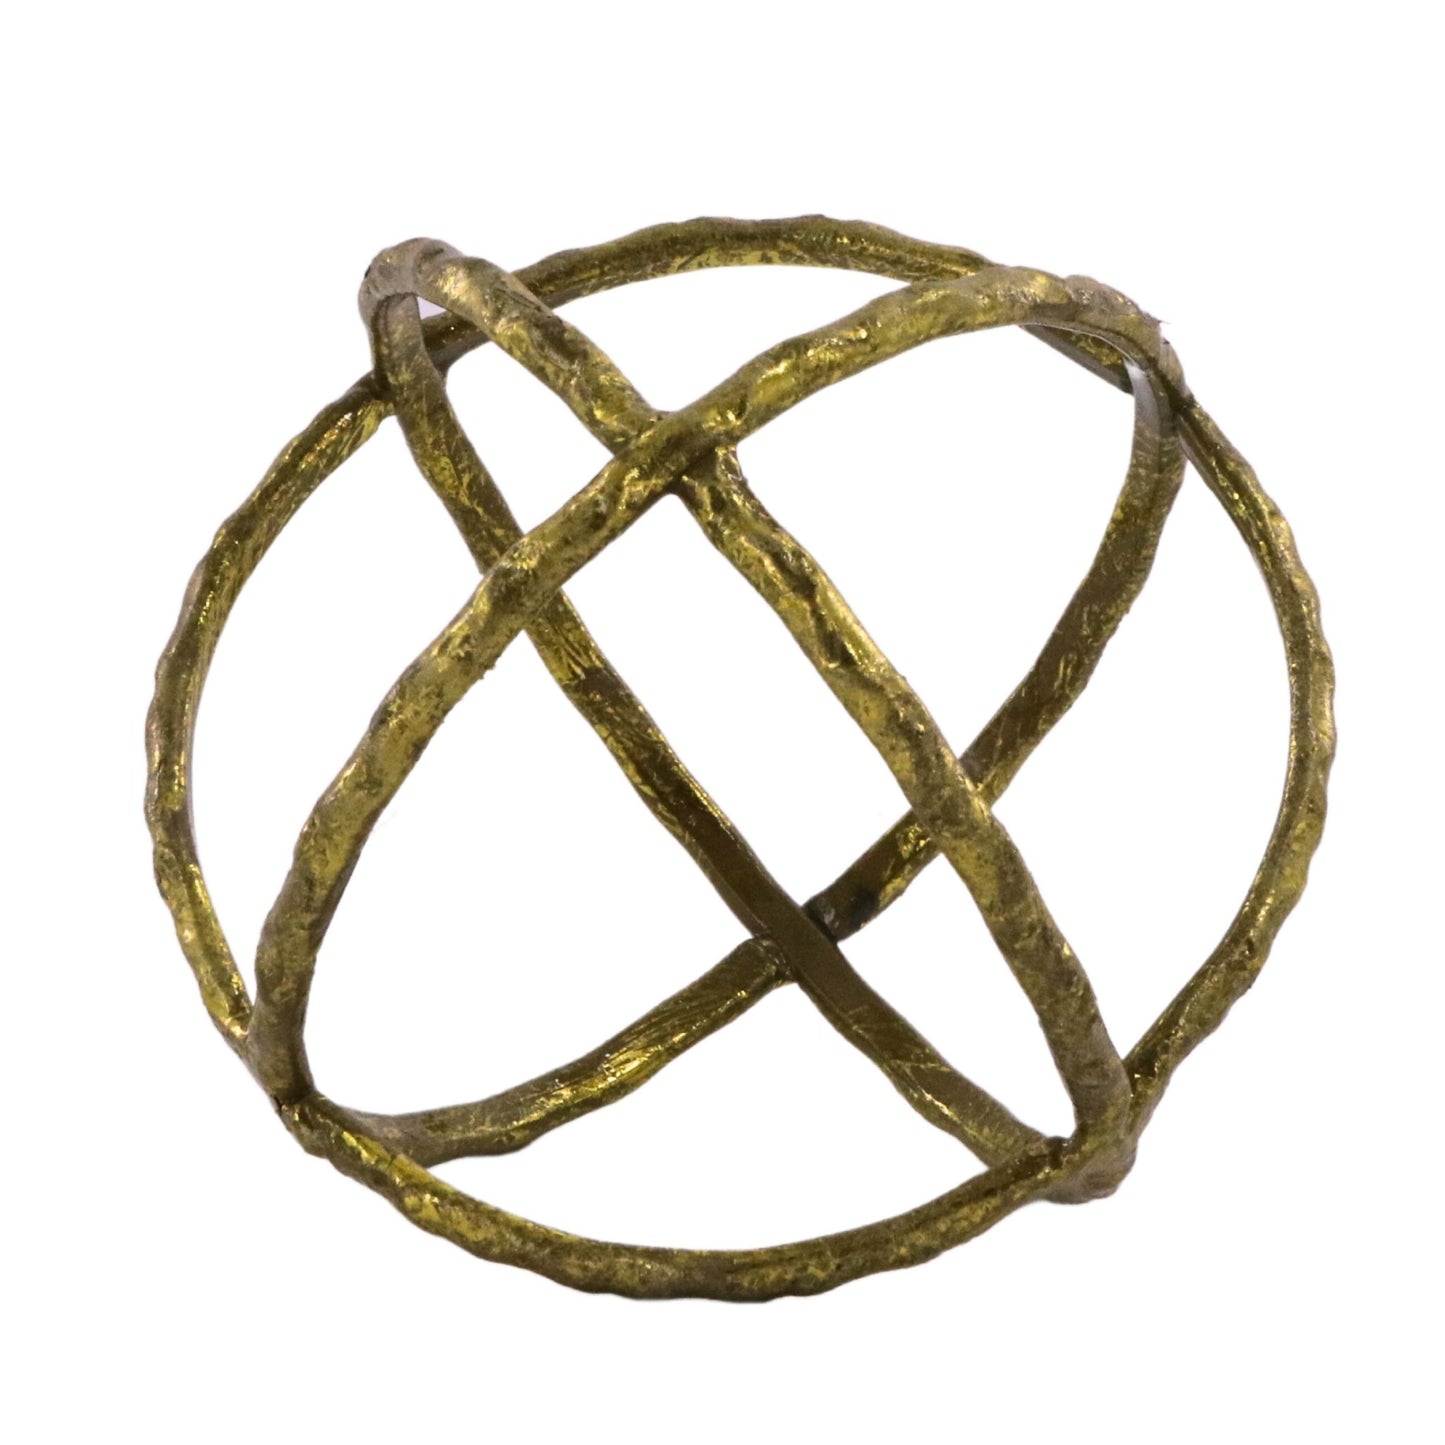 Gold Orb Decorative Object